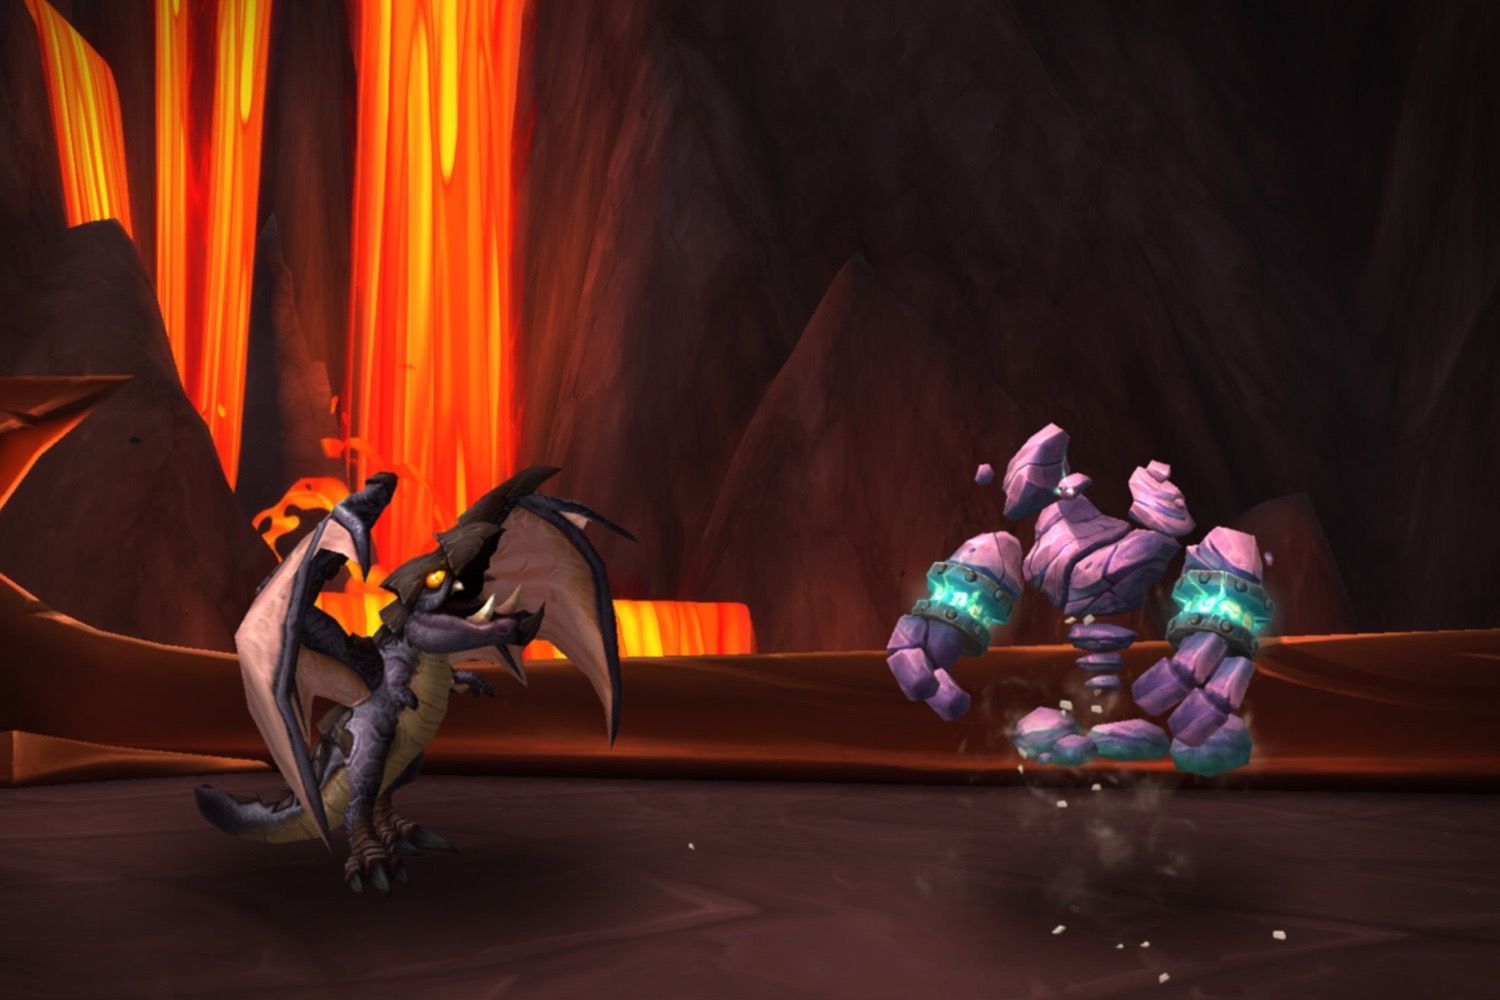 The elemental pet, Chip, and the Obsidian Proto-Whelp pets together beside lava.